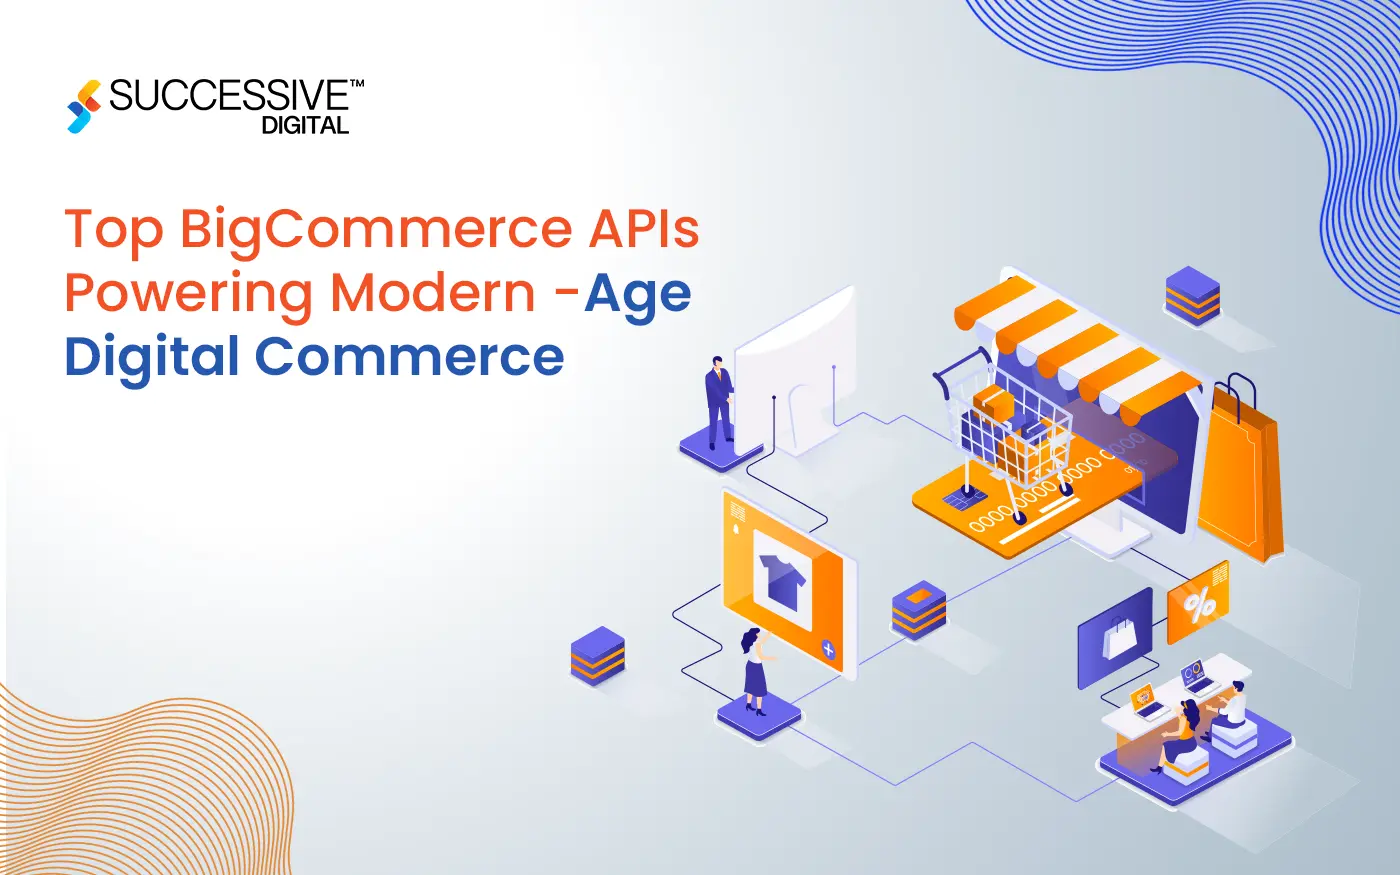 Understanding the Role of BigCommerce APIs in Powering Digital Commerce